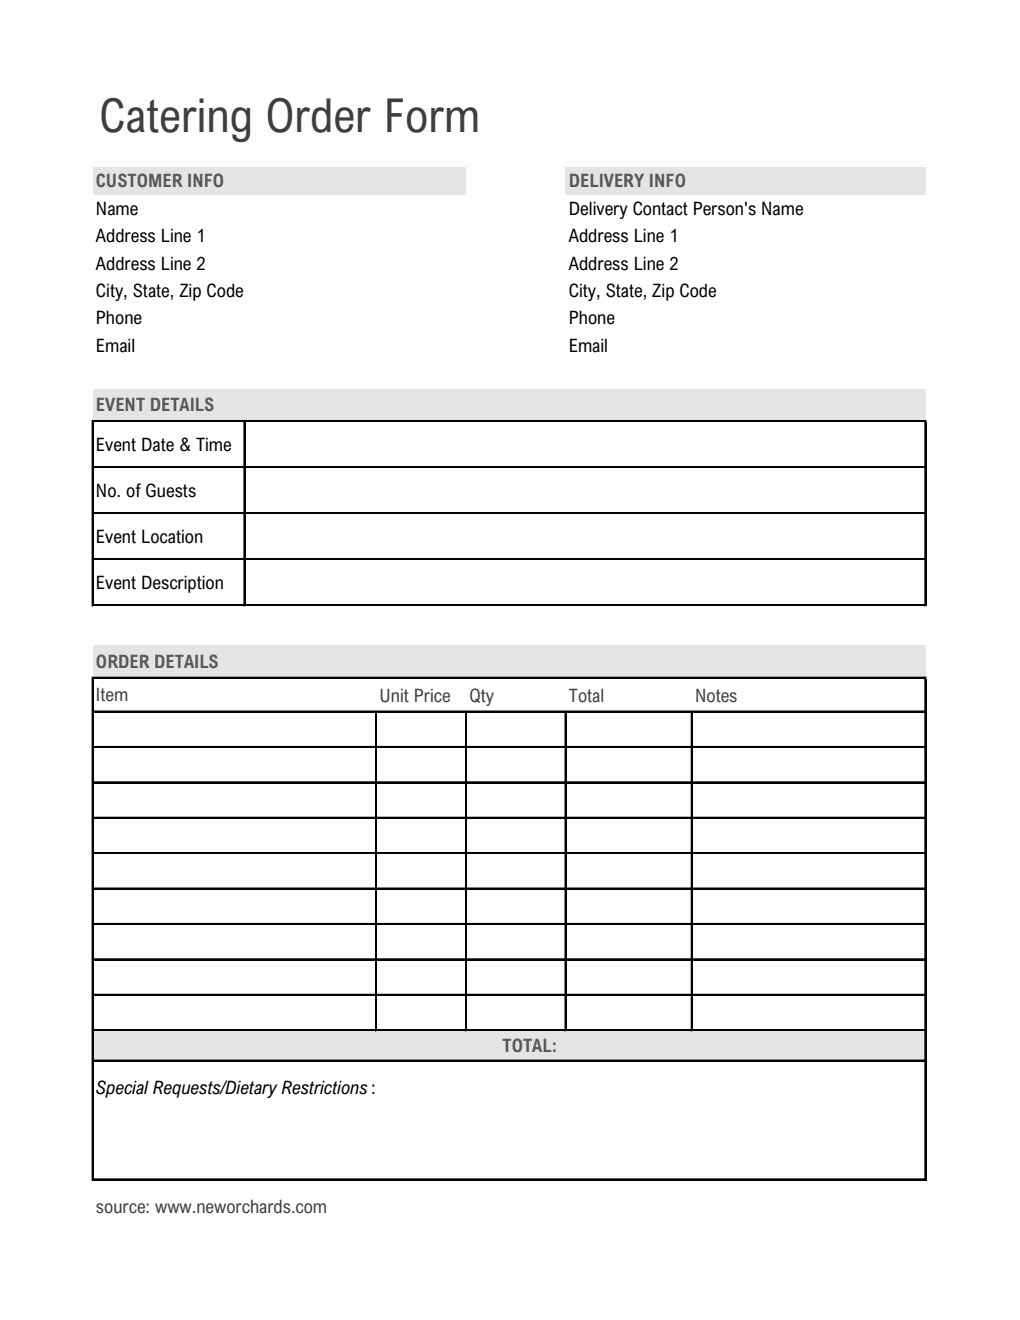 Simple Catering Order Form Template in Excel